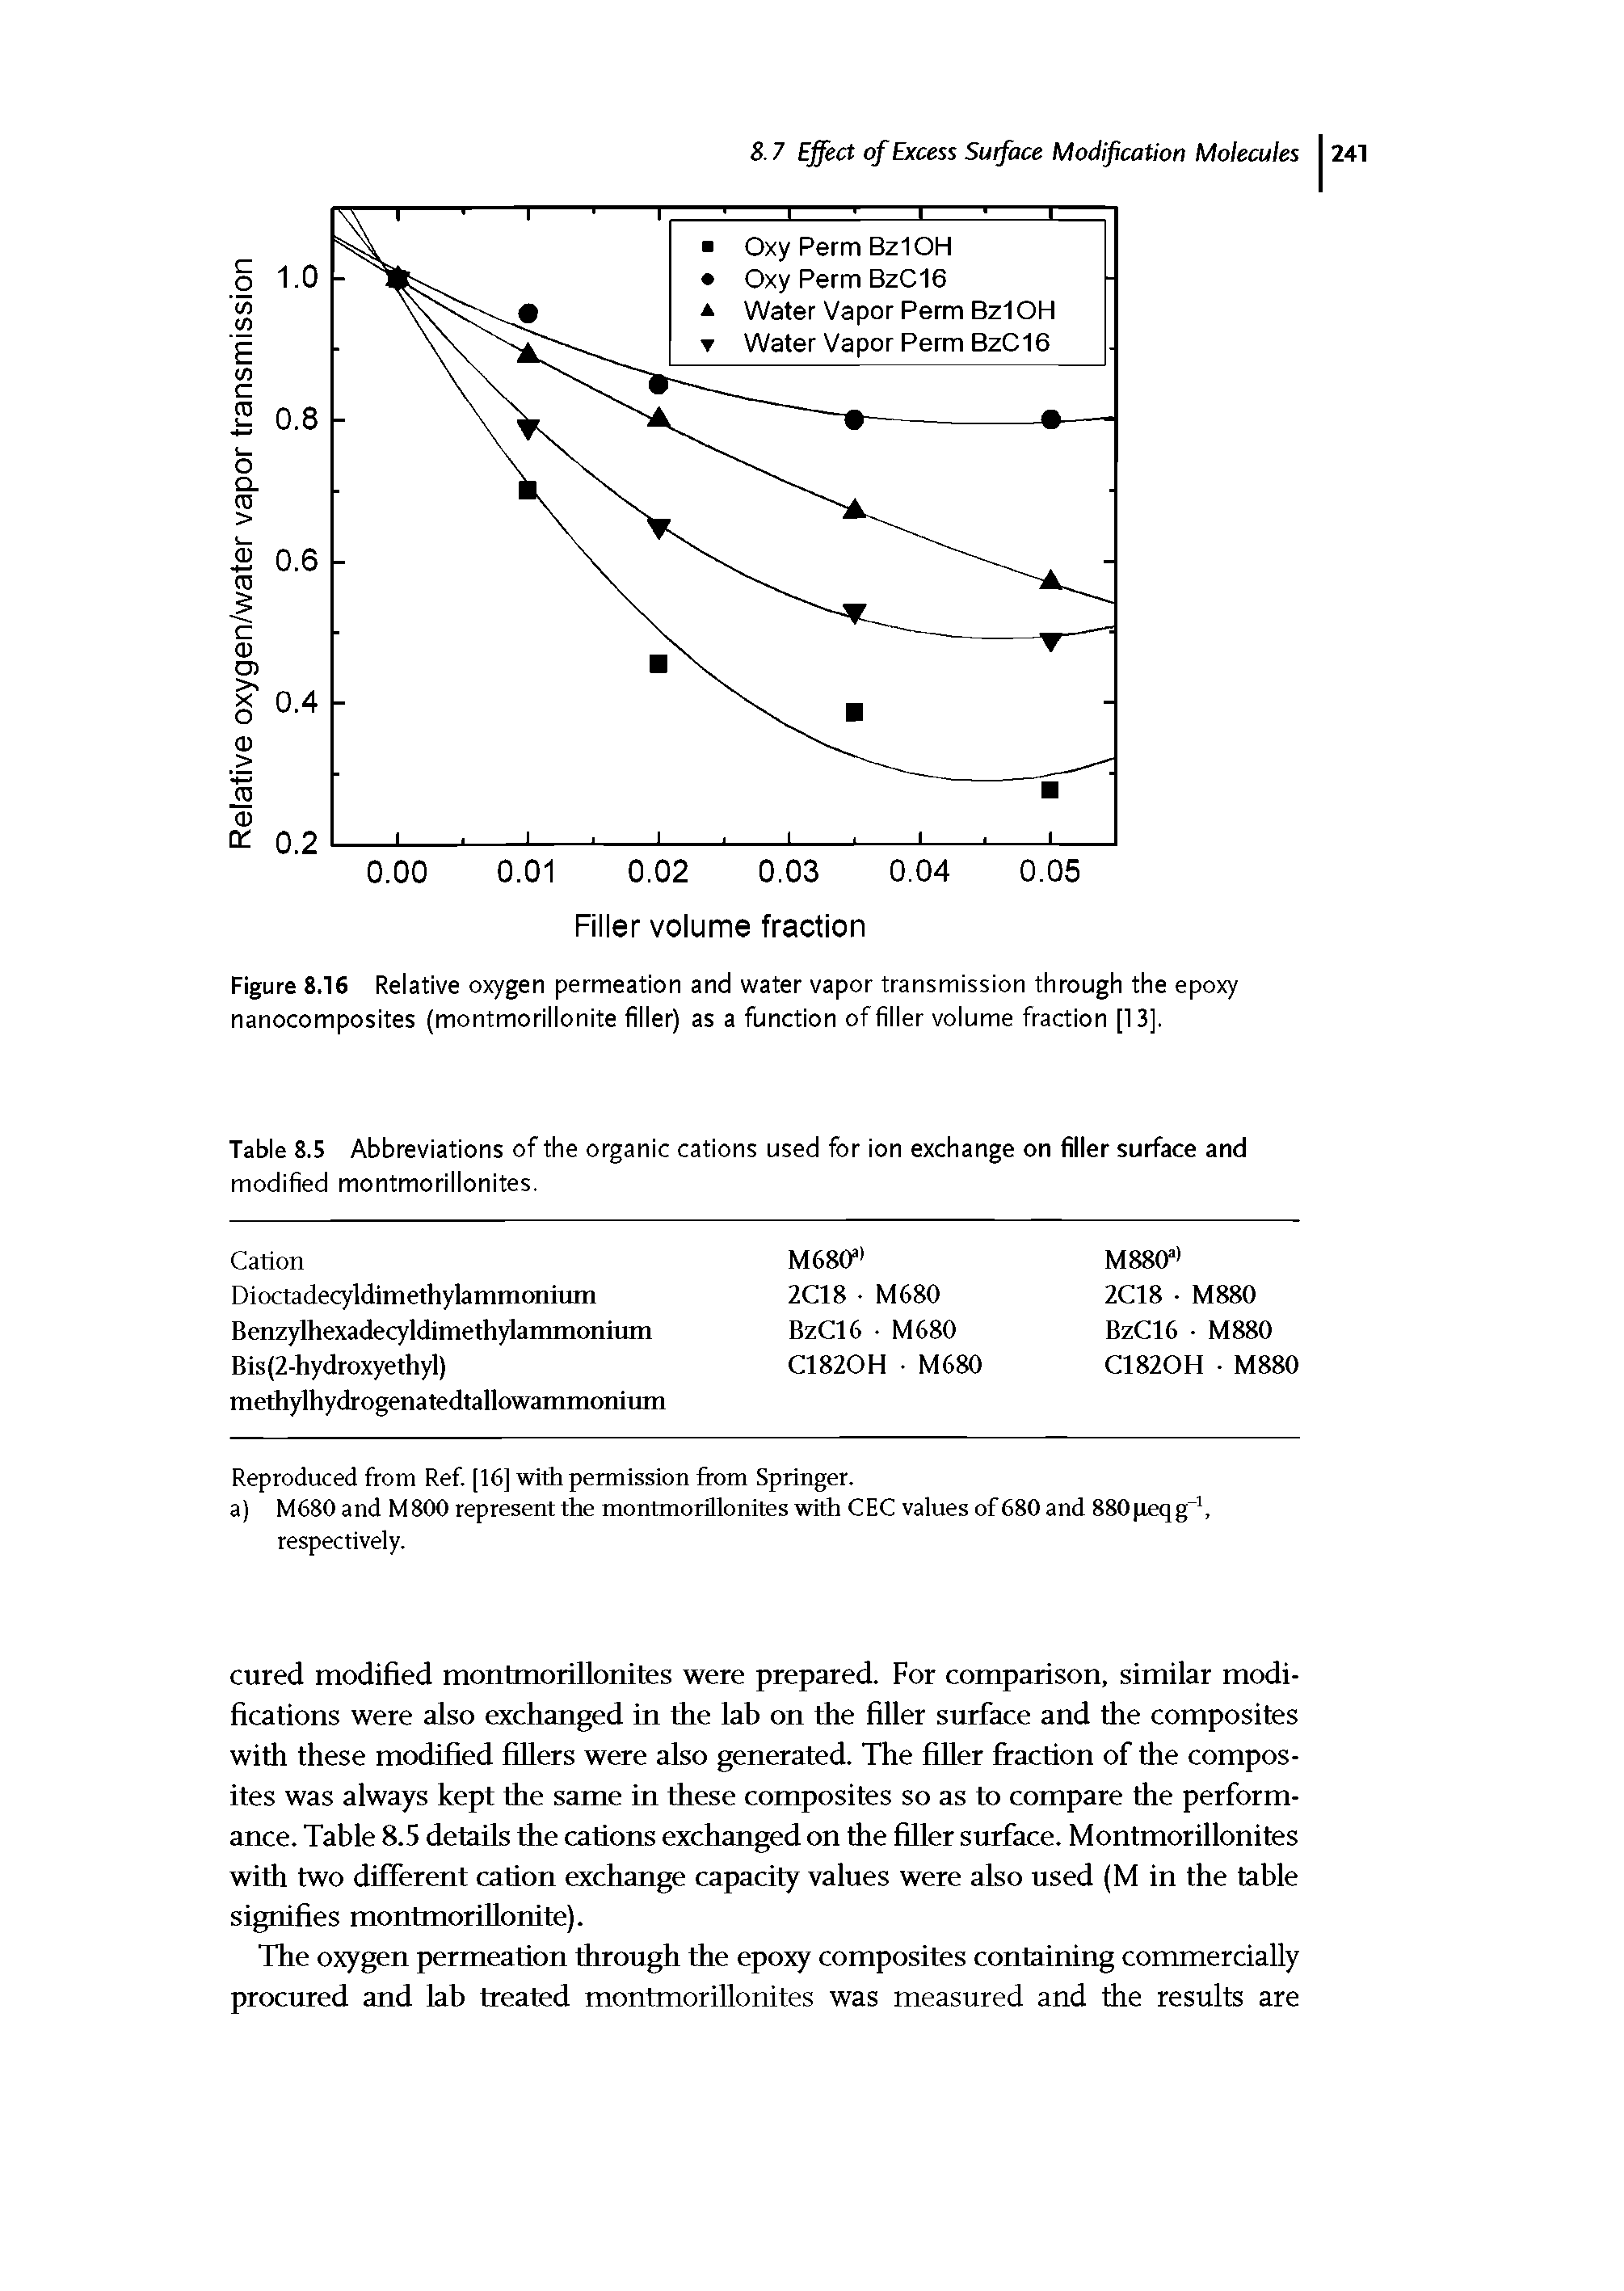 Figure 8.16 Relative oxygen permeation and water vapor transmission through the epoxy nanocomposites (montmorillonite filler) as a function of filler volume fraction [13].